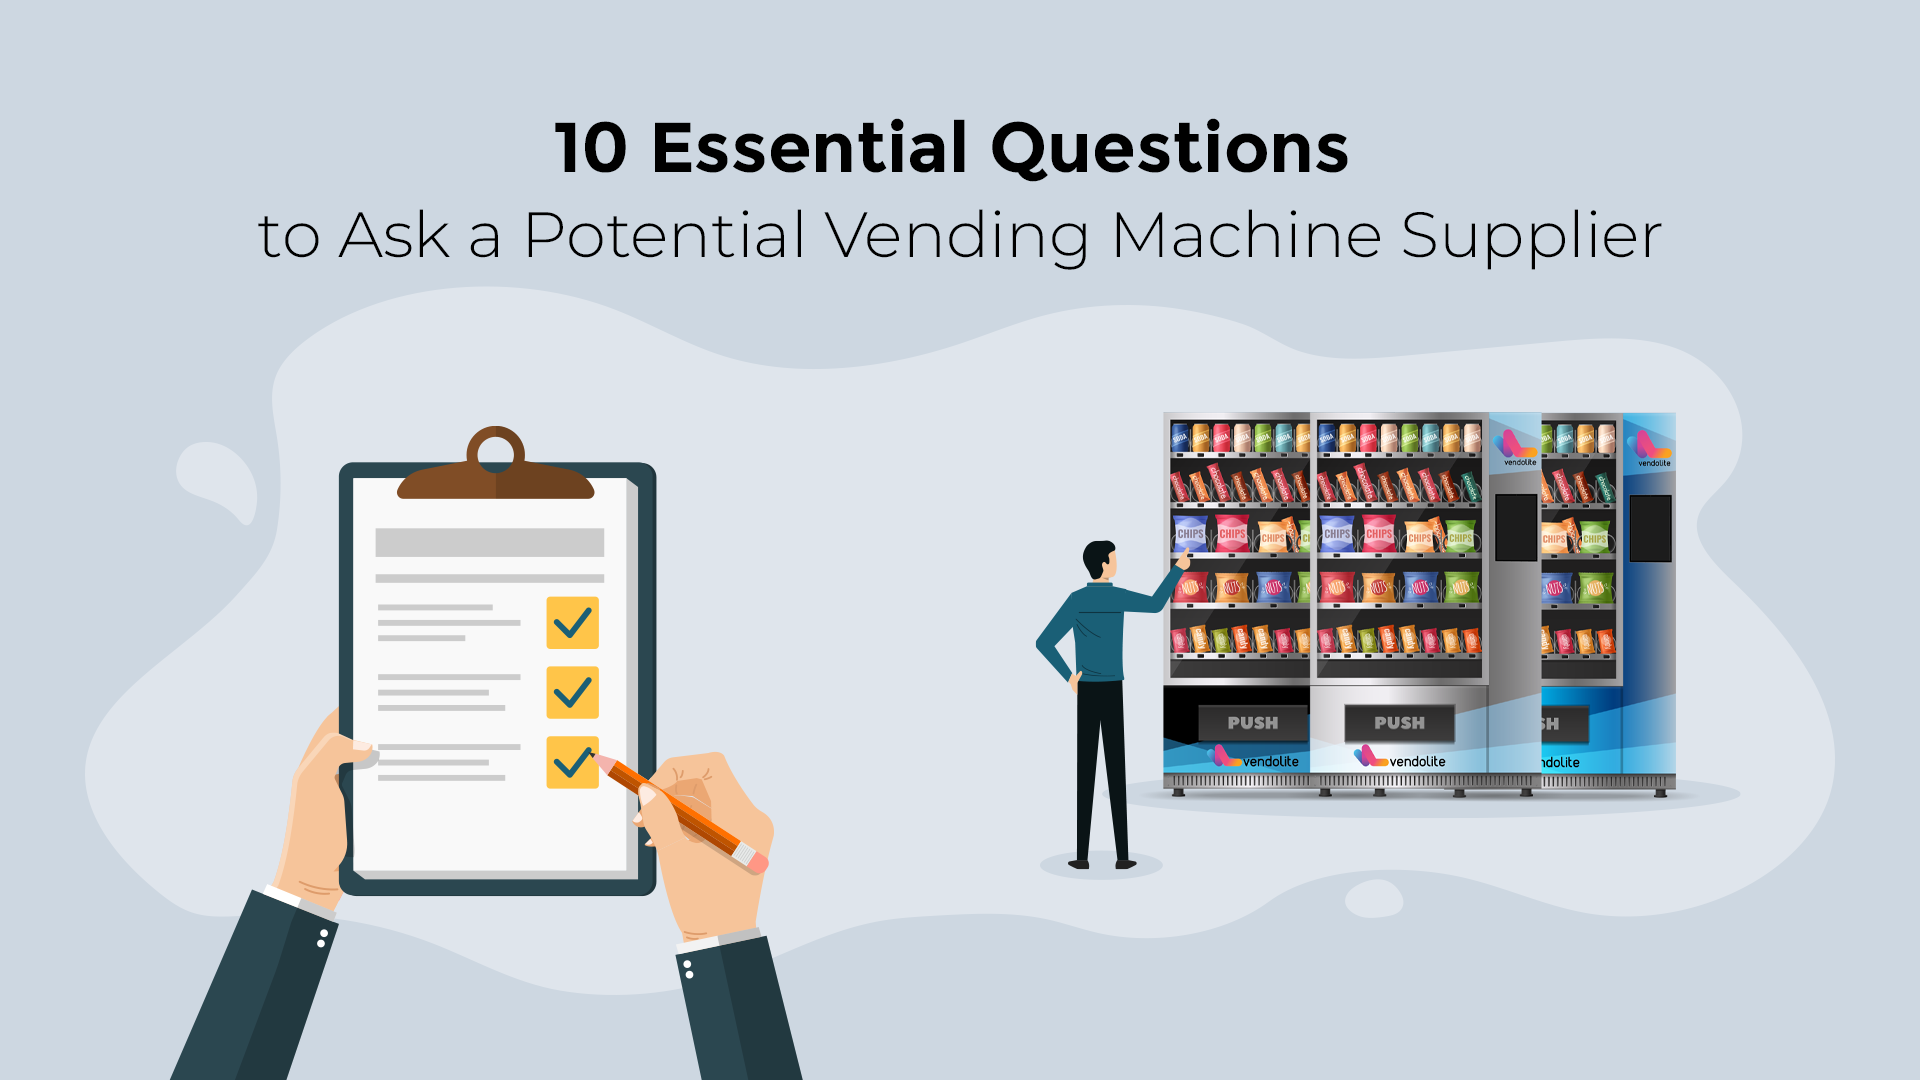 10 Essential Questions to Ask a Potential Vending Machine Supplier